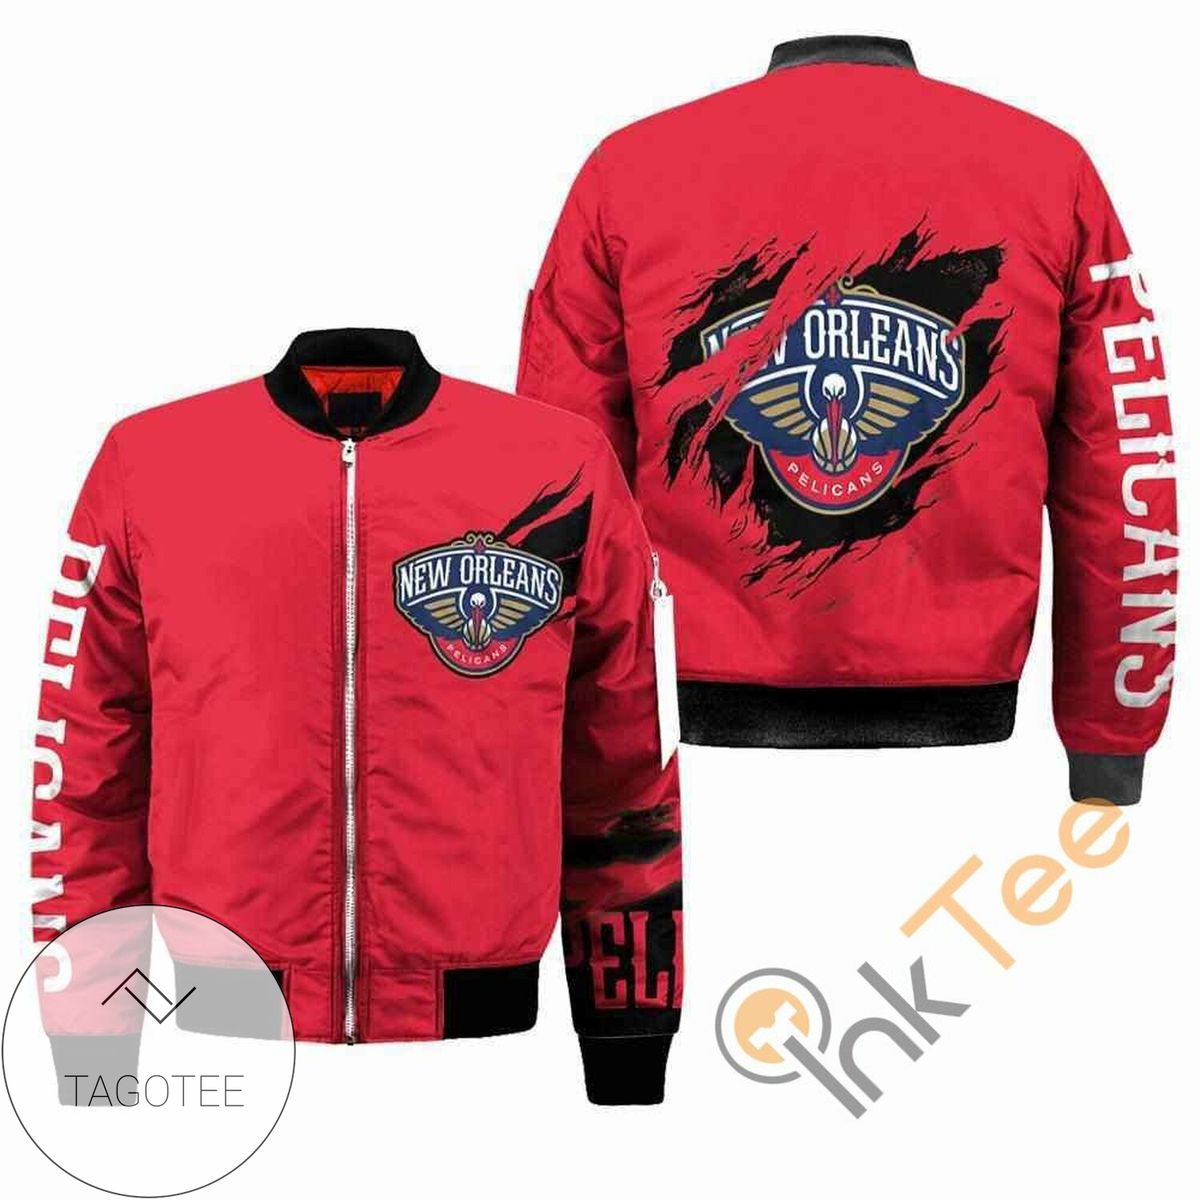 New Orleans Pelicans NBA Apparel Best Christmas Gift For Fans Bomber Jacket